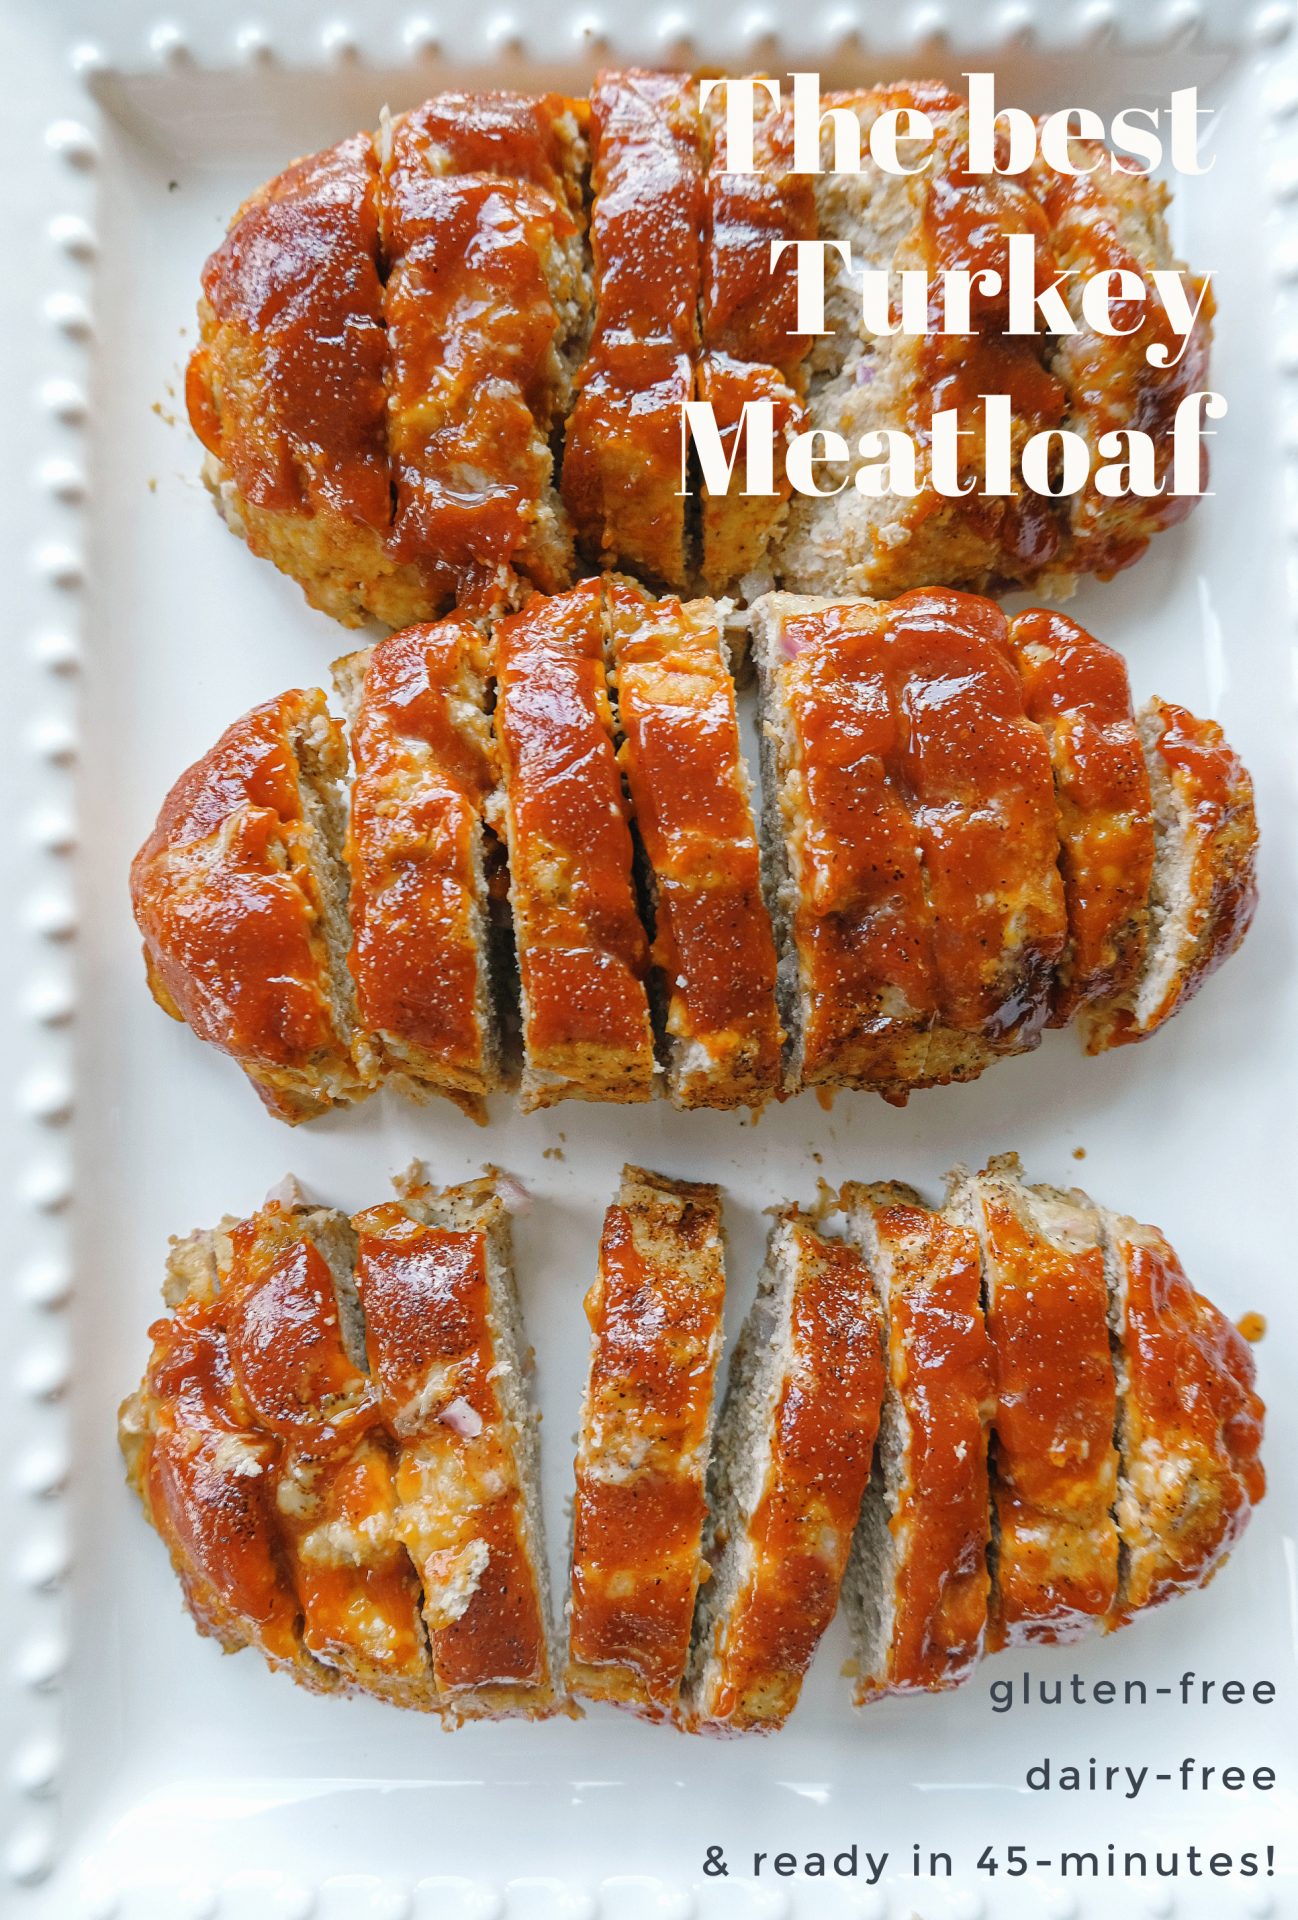 Meatloaf, healthy dinner, turkey, low fat, the best meatloaf recipe, gluten free, dairy free, dinner night, 30-minute meals, delicious